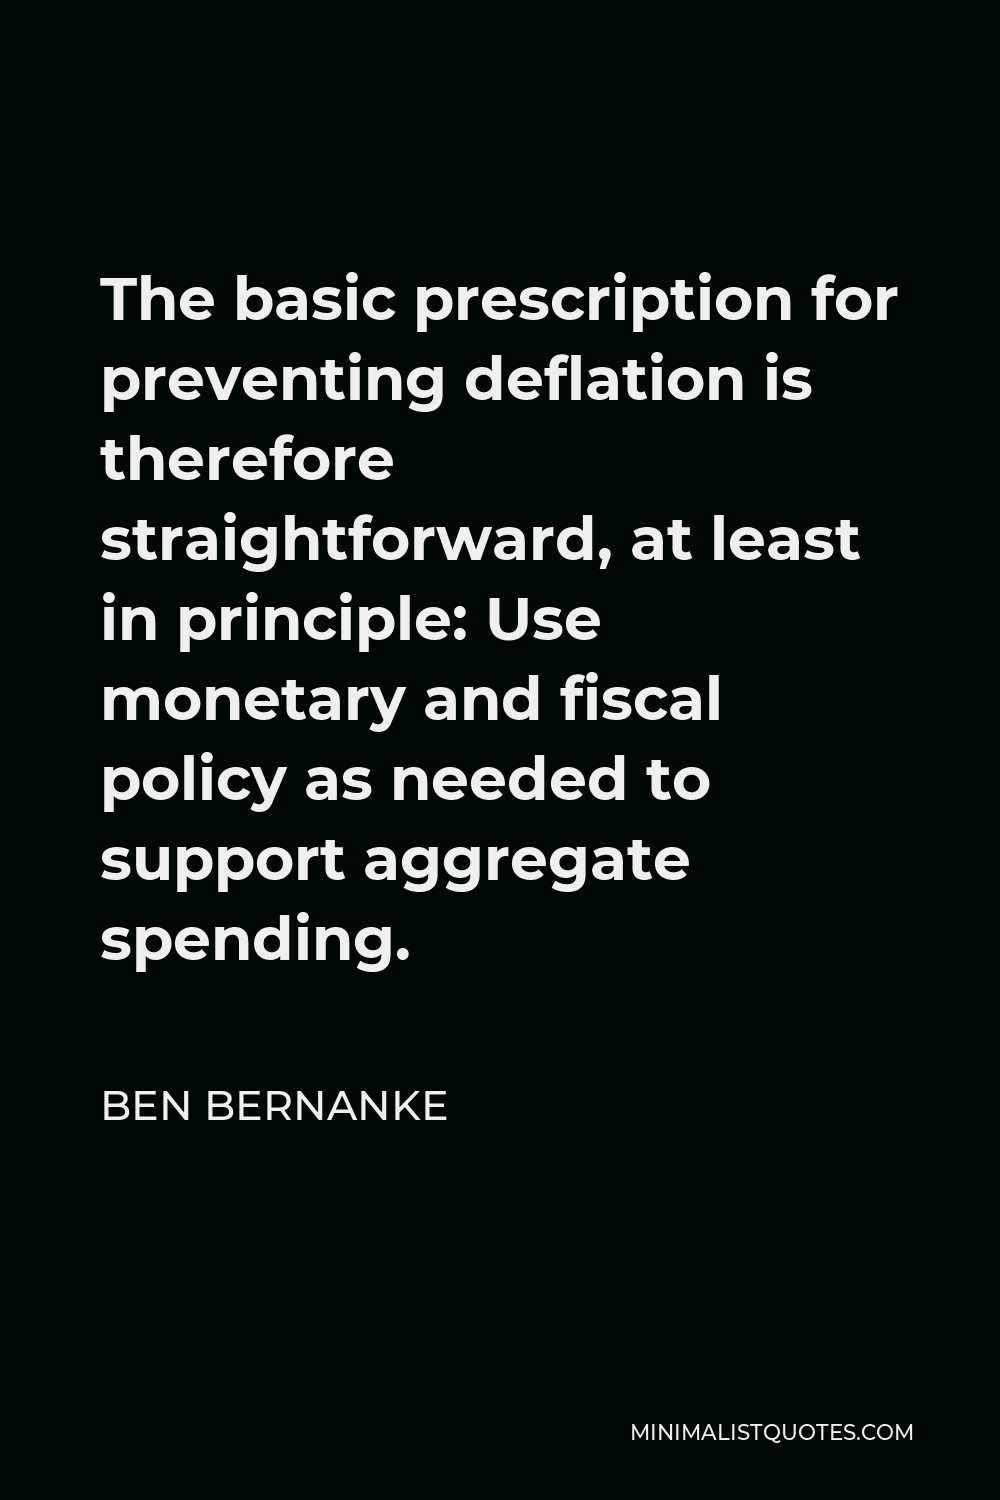 Ben Bernanke Quote - The basic prescription for preventing deflation is therefore straightforward, at least in principle: Use monetary and fiscal policy as needed to support aggregate spending.